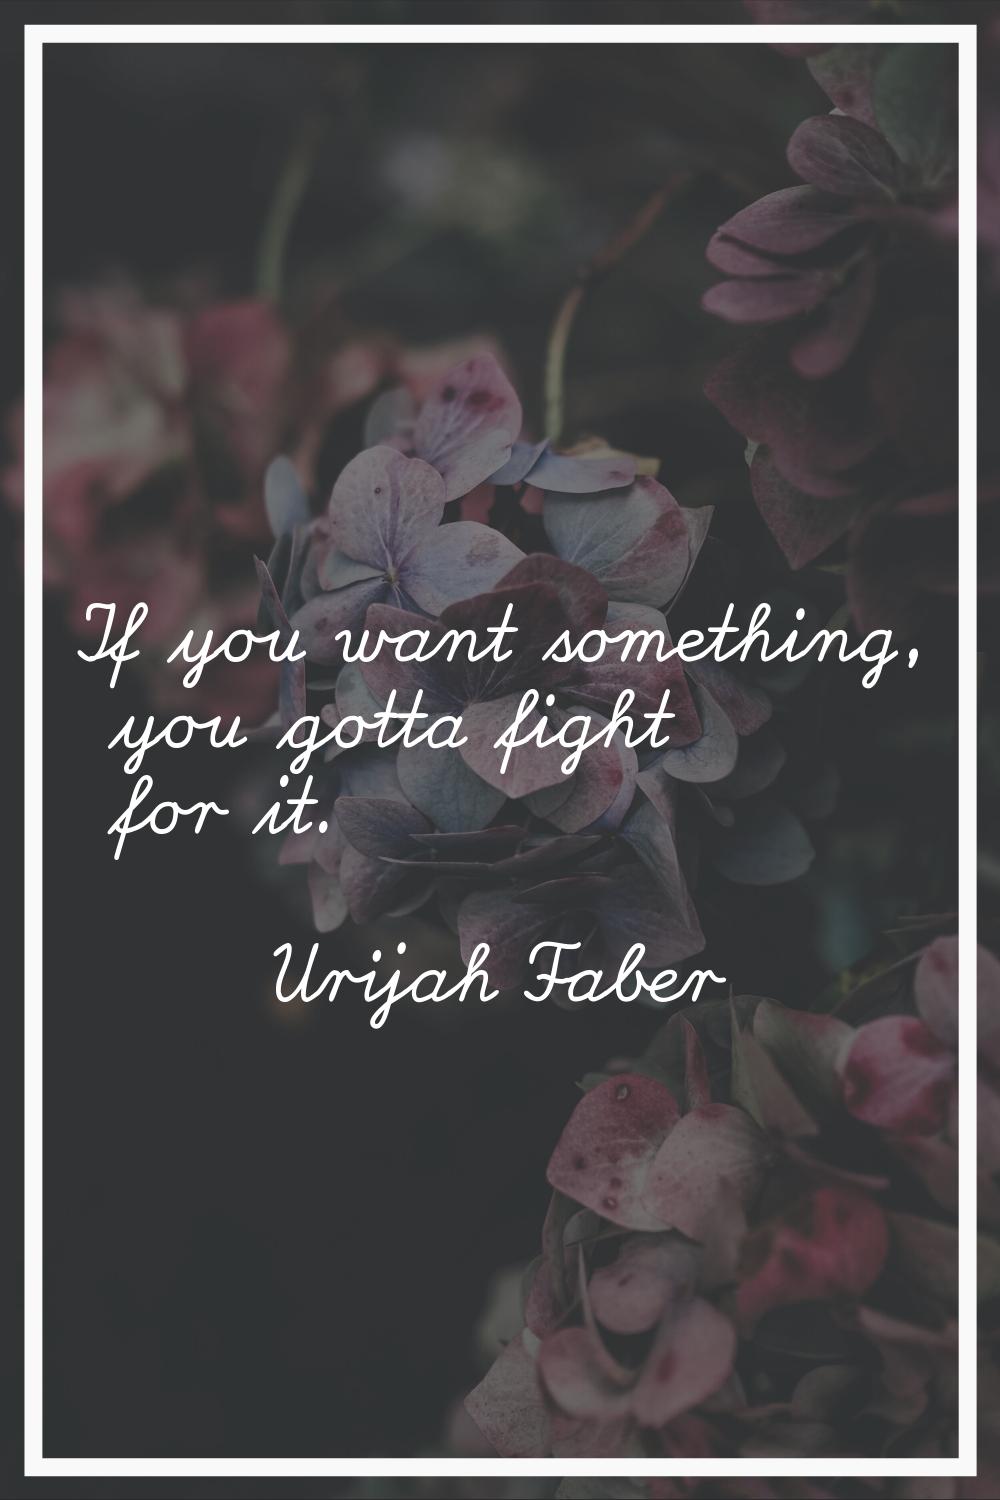 If you want something, you gotta fight for it.